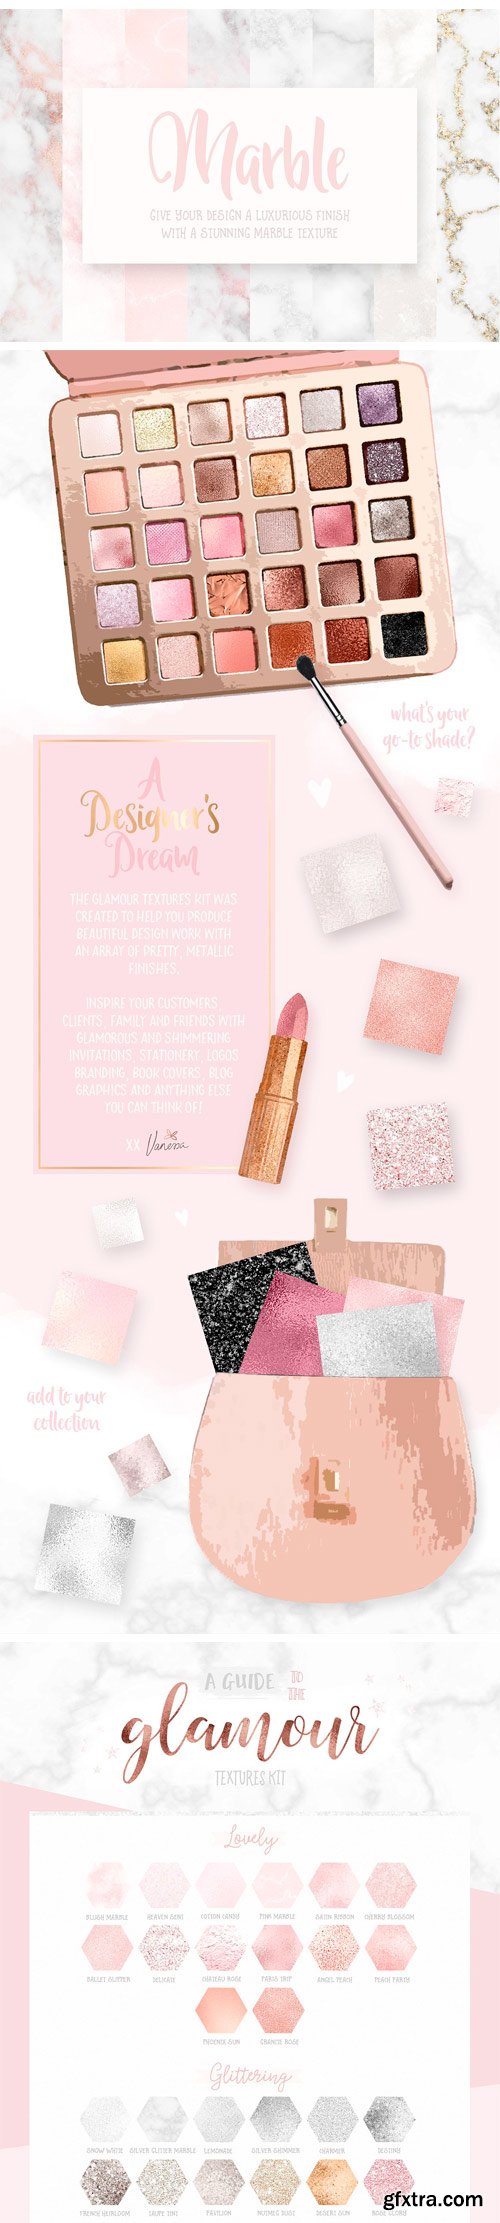 CM - Glitter, Rose Gold + Marble Textures 1675268